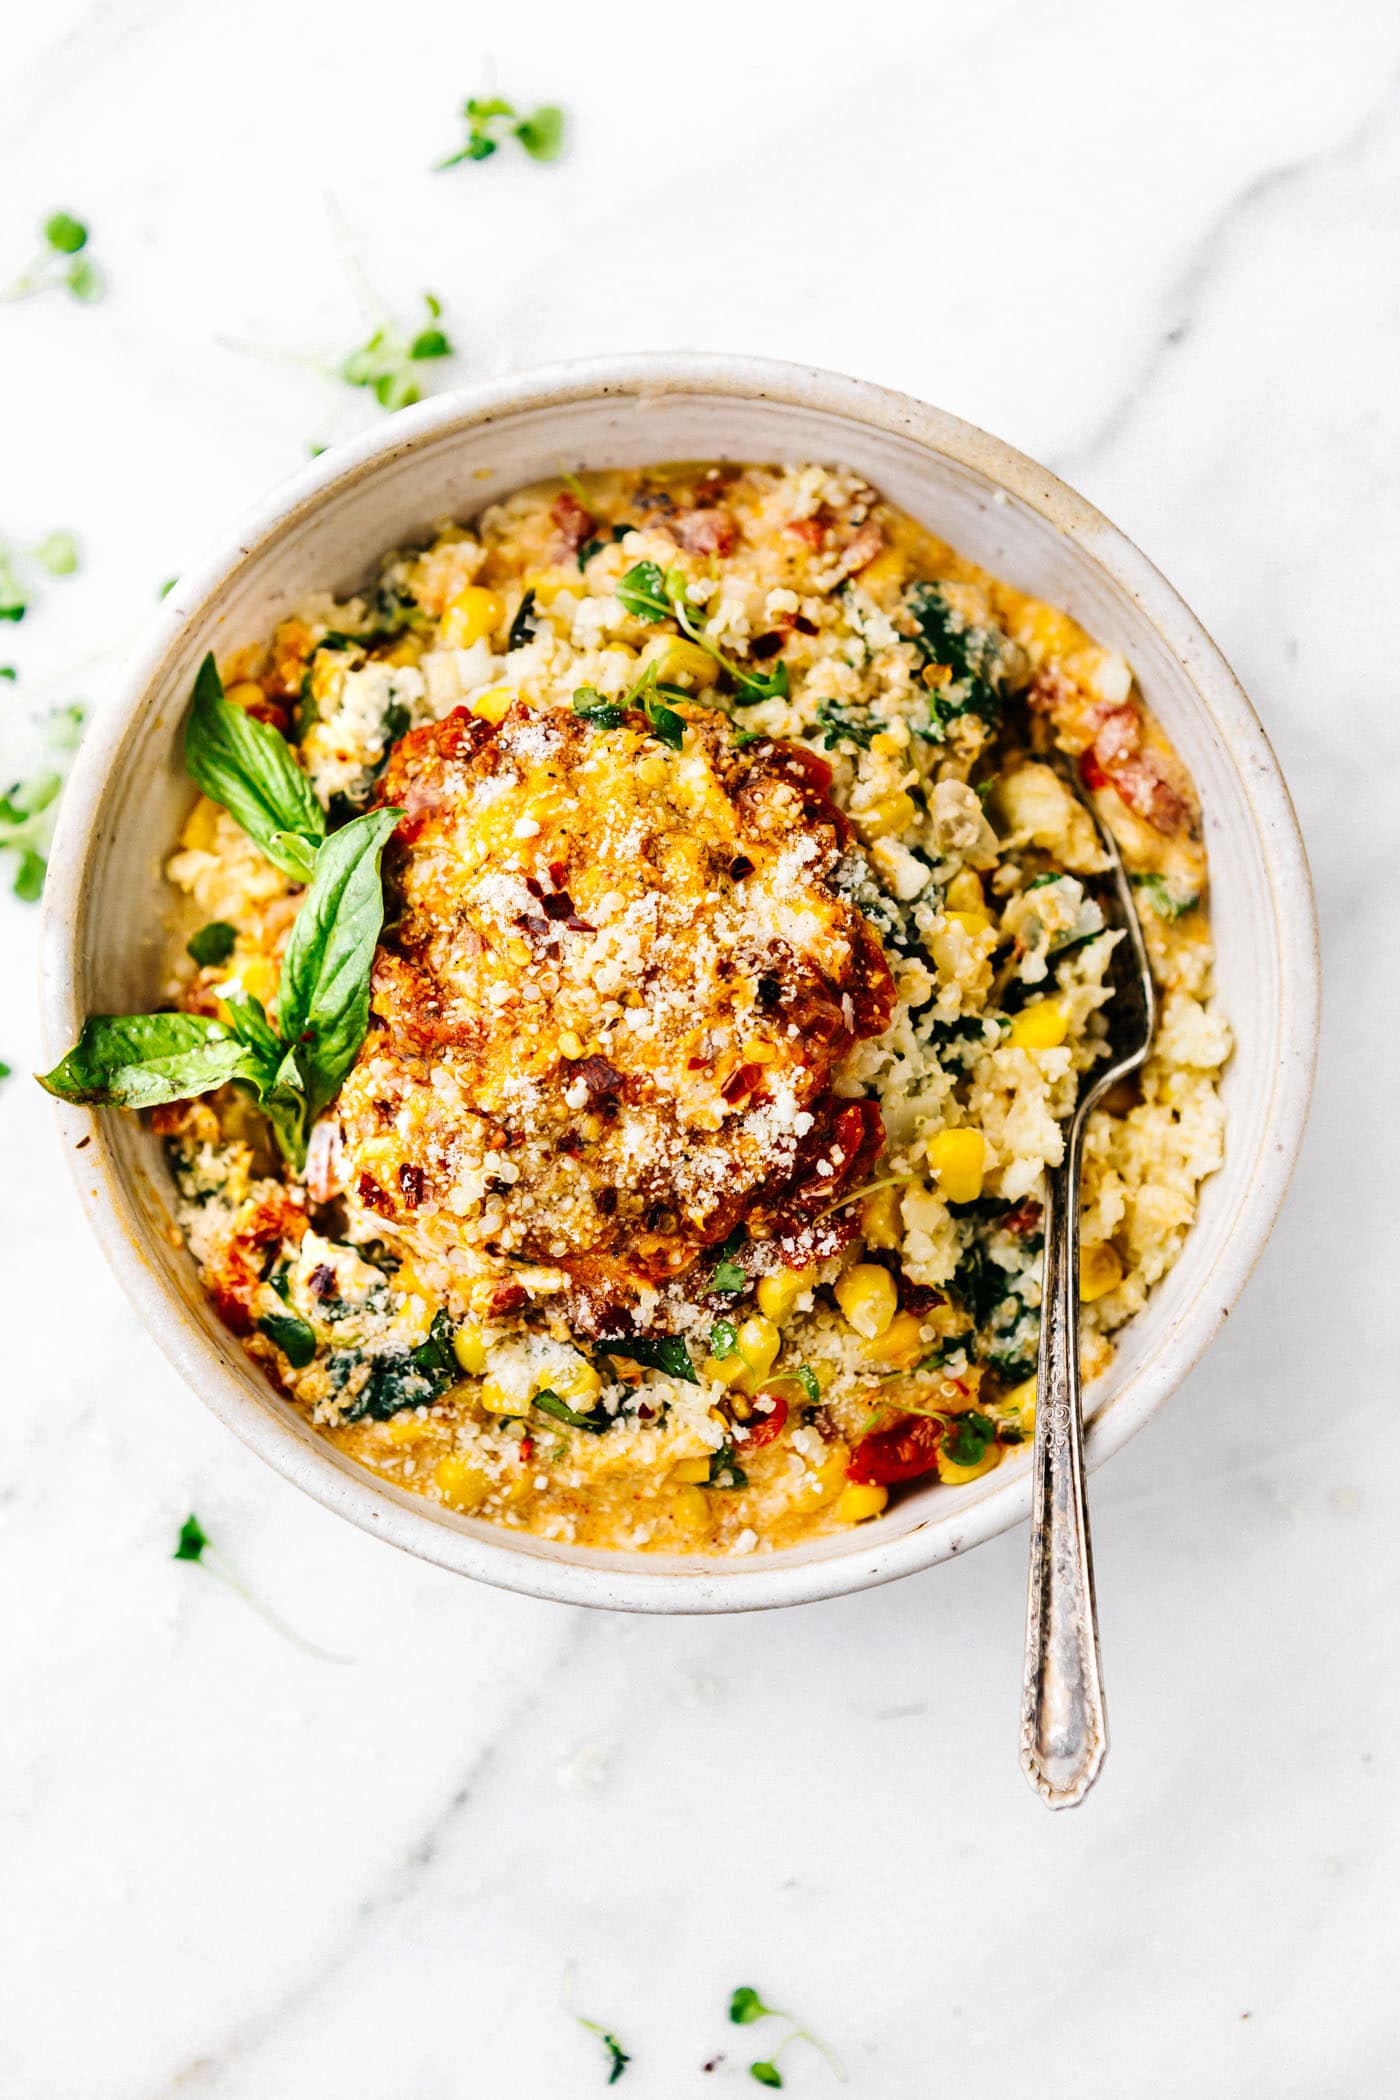 This Creamy Sweet Corn Cauliflower Grits recipe makes for a flavor packed one pot meal! Vegetarian Comfort food made lighter and healthier! Cauliflower riced into "grits" with sweet corn, Gruyere cheese, spinach, basil, onion, and more! Ready in 30 minutes